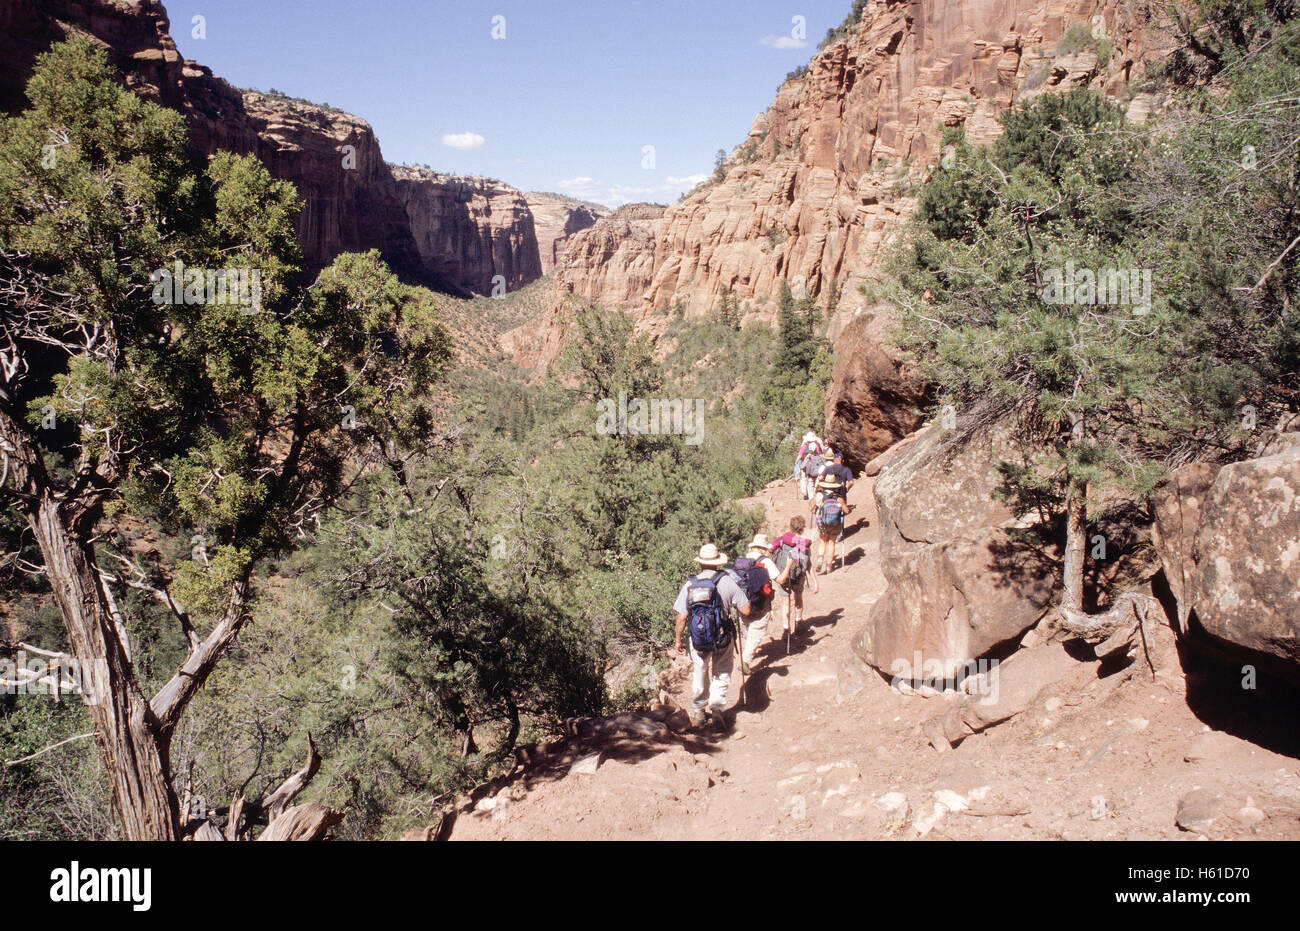 Group of hikers begin descent down trail into Canyon de Chelly National Monument, Arizona Stock Photo